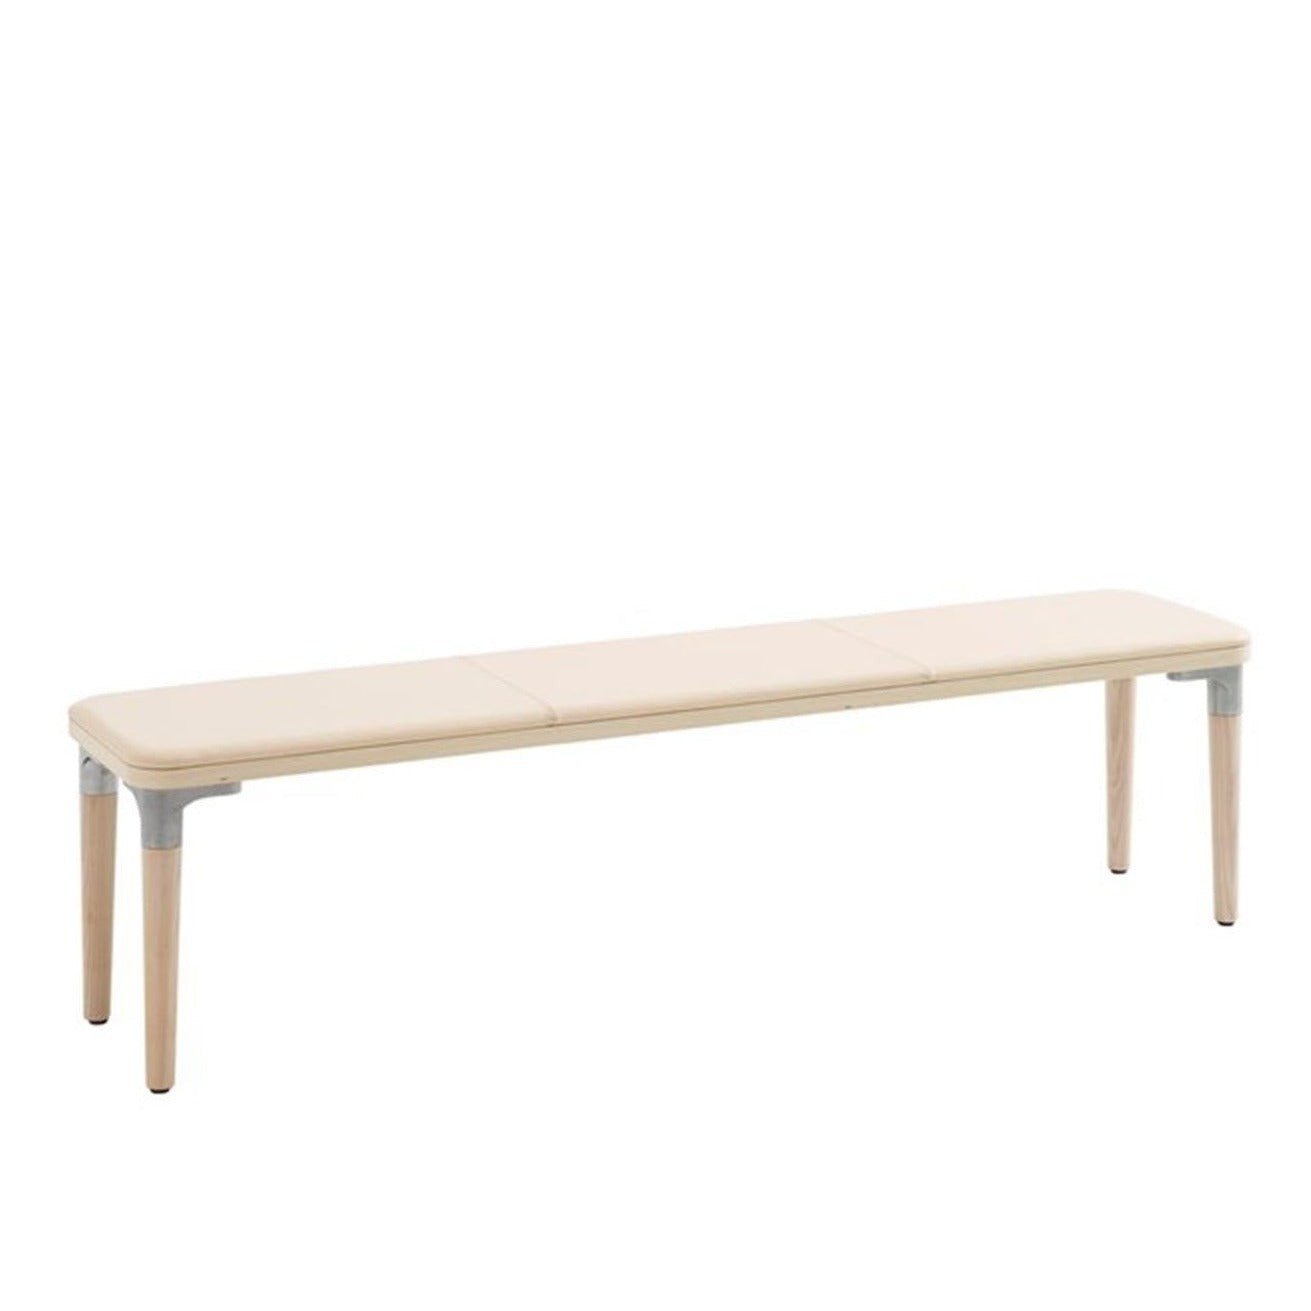 TAILOR Bench natural, beige upholstery 200 cm